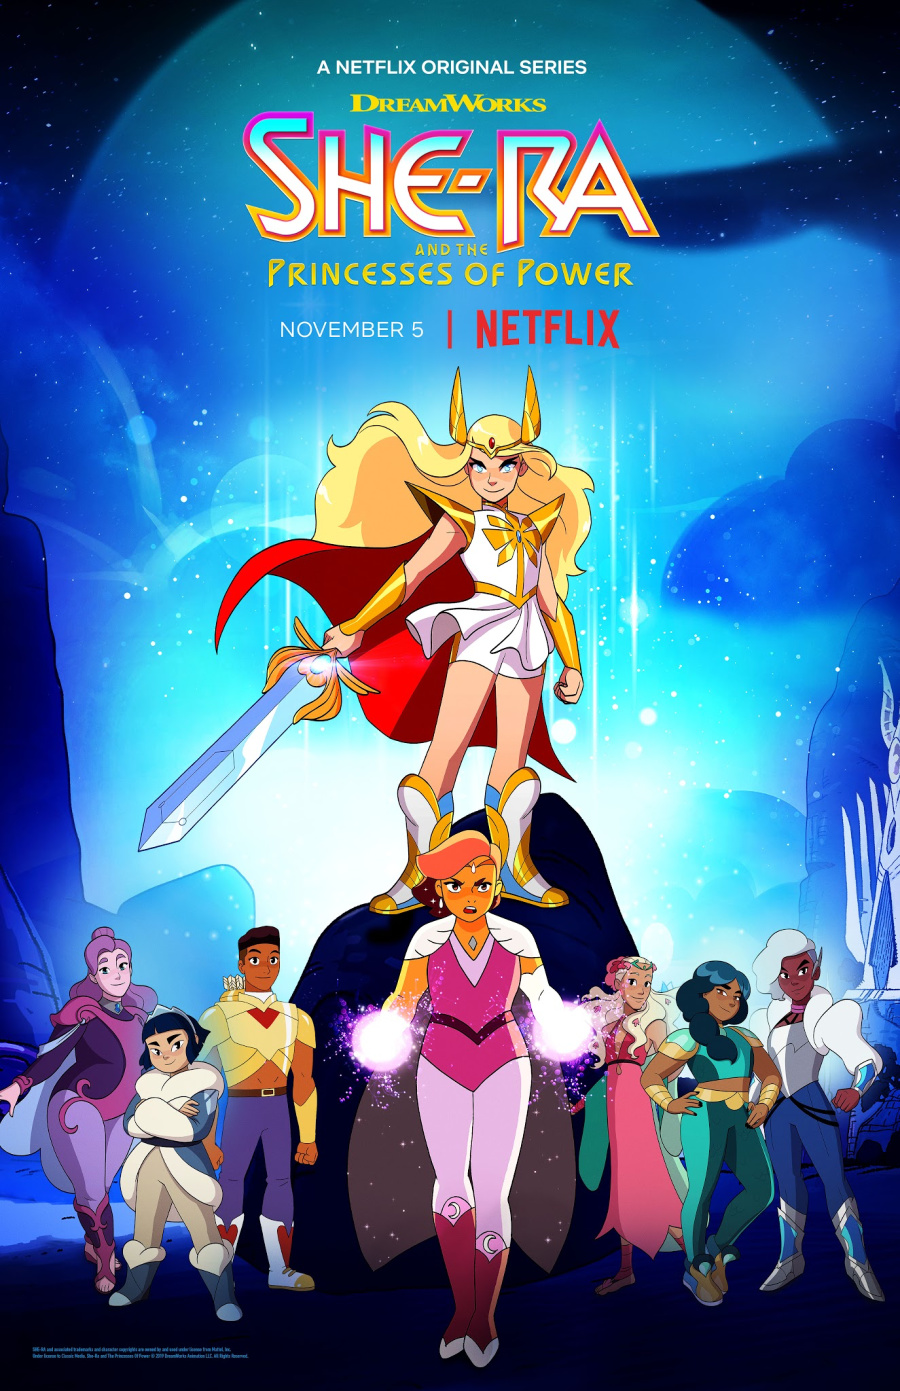 She-Ra and the Princesses of Power Returning to Netflix on November 5